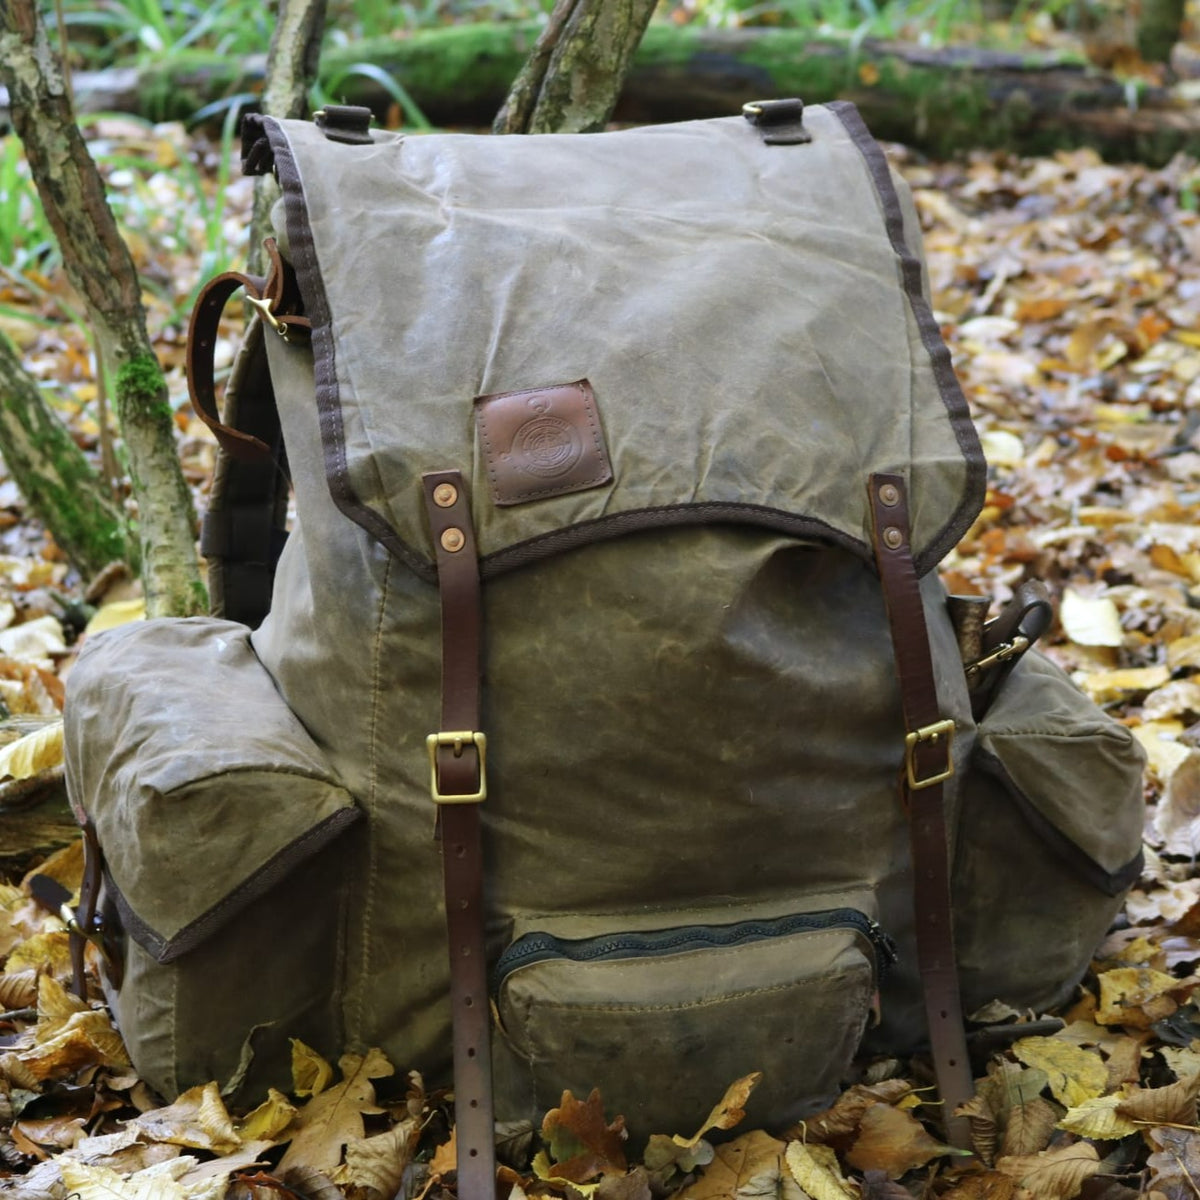 Handmade | Bushcraft Backpack | Camping Backpack| Leather | Waxed Canvas  Backpack | Camping, Hunting, Bushcraft, Travel | Personalization